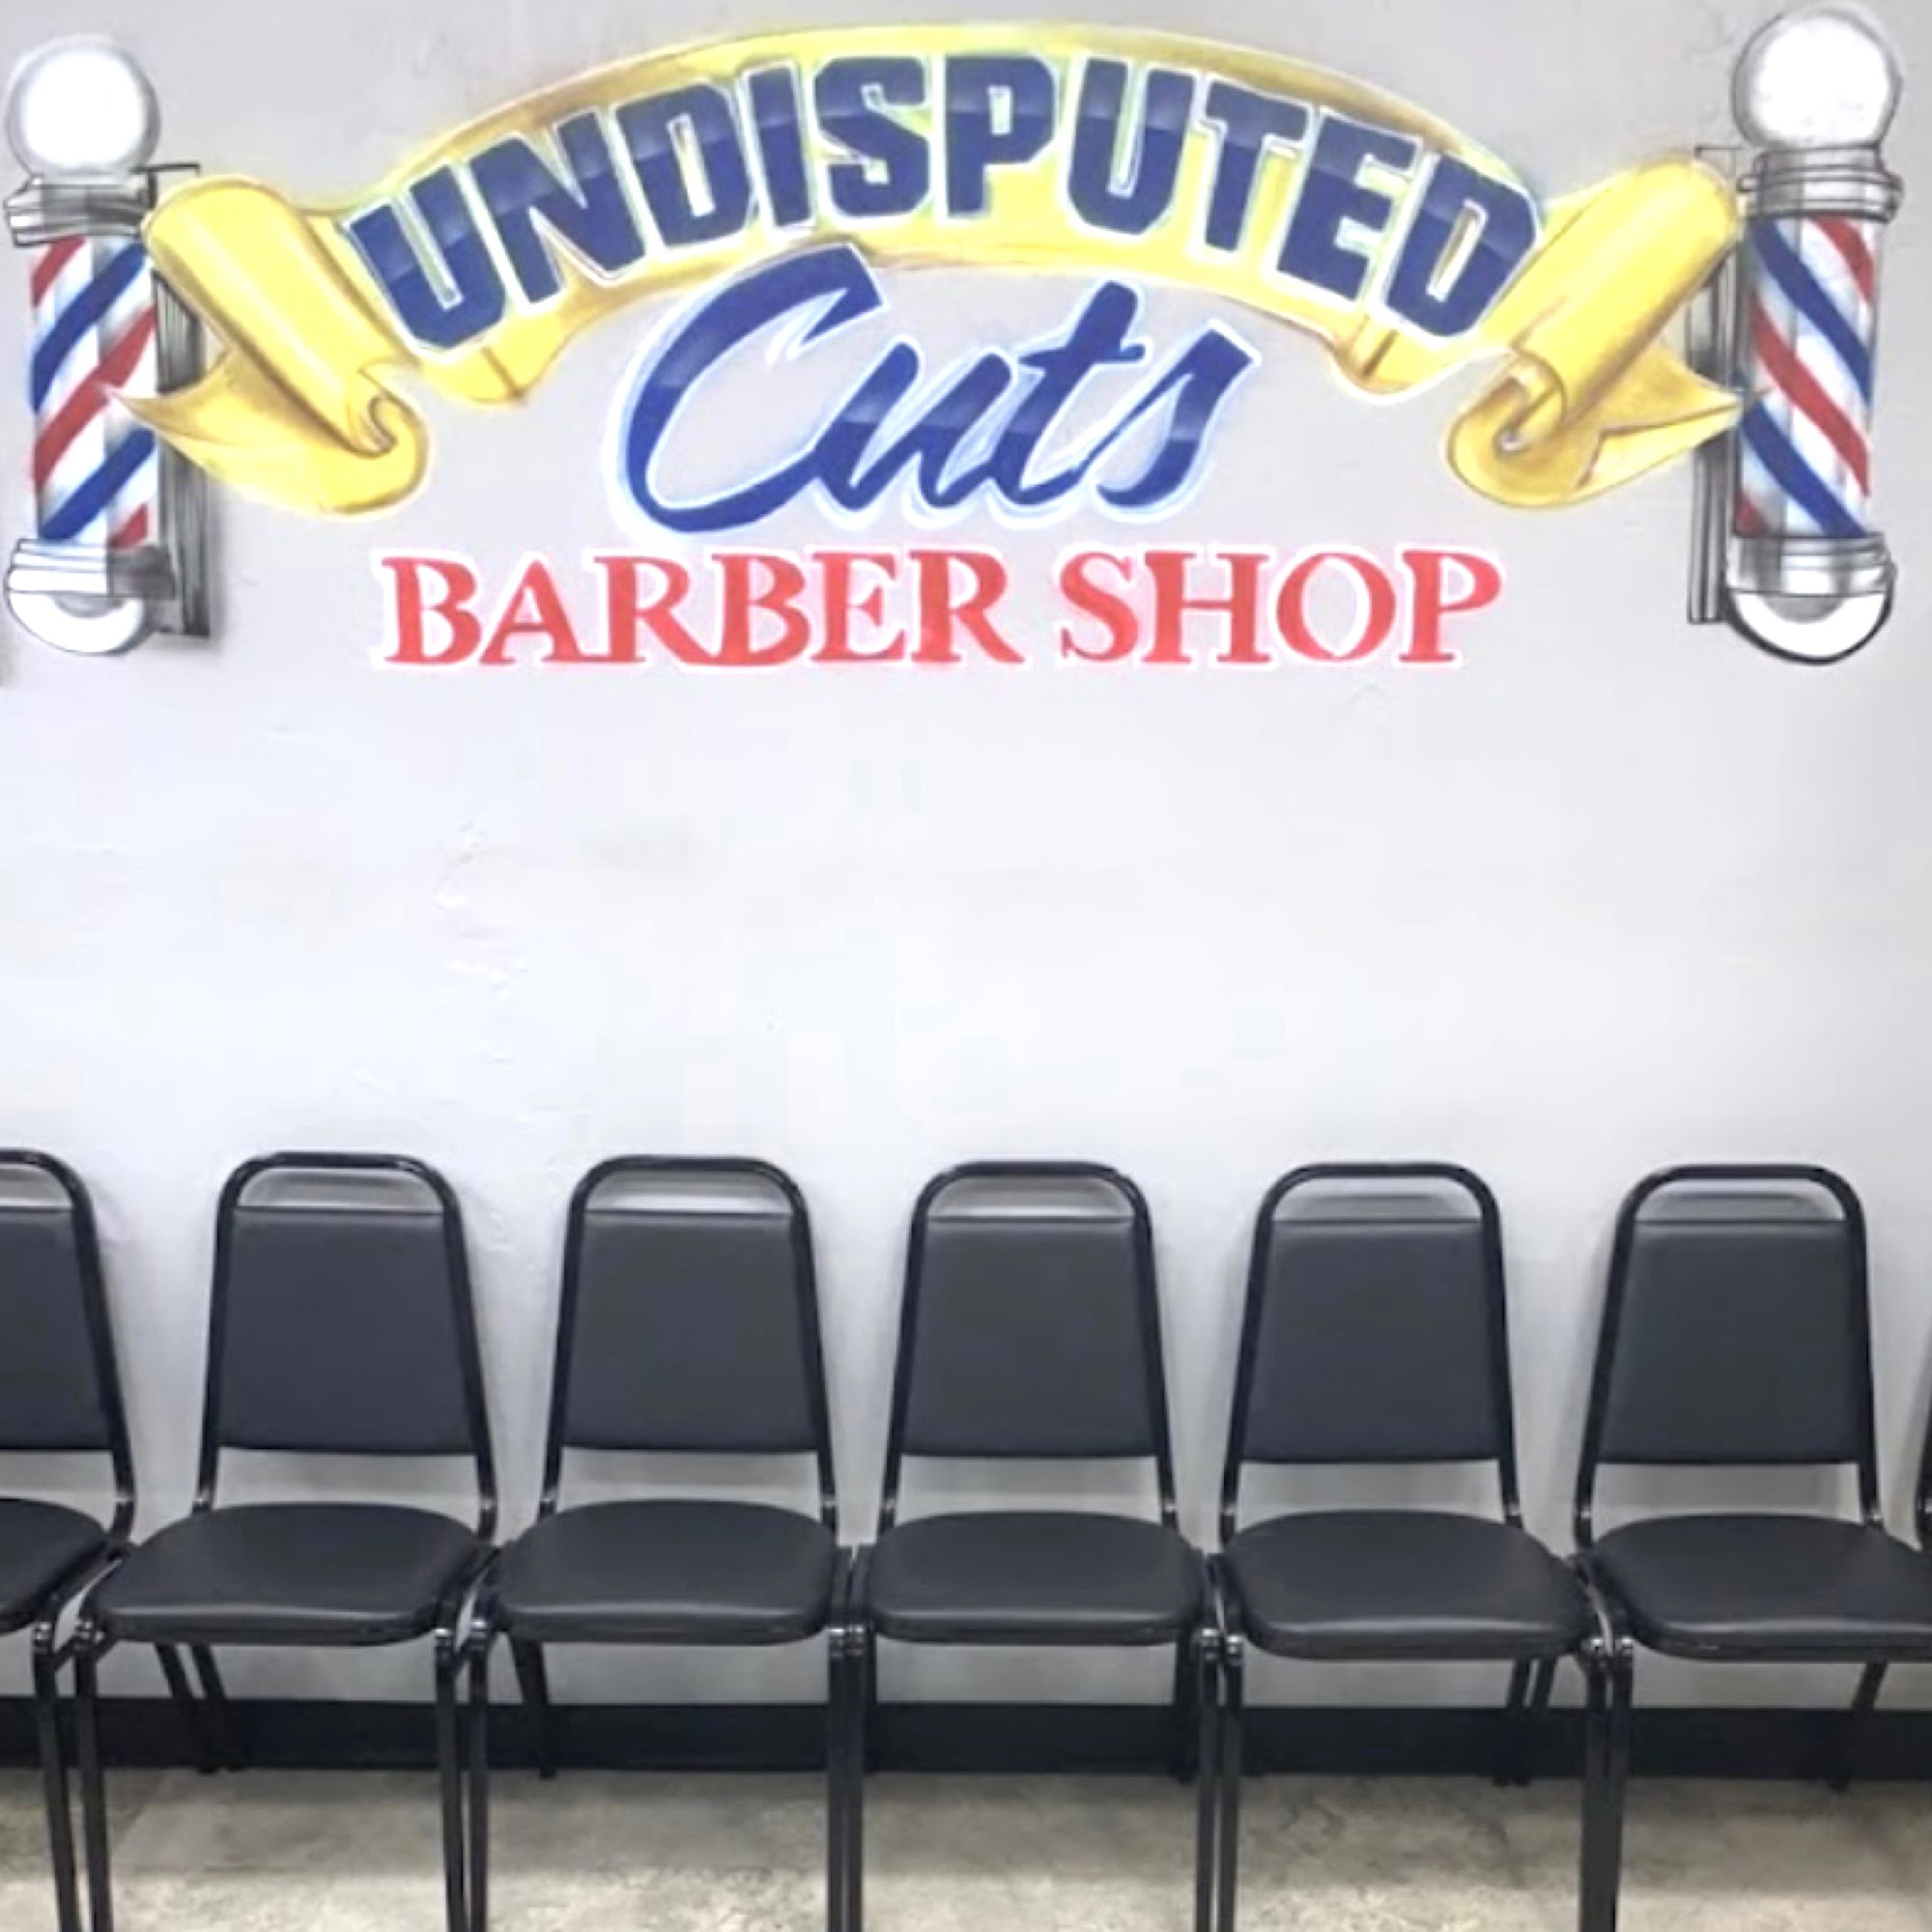 Undisputed Cuts Barbershop by Don G